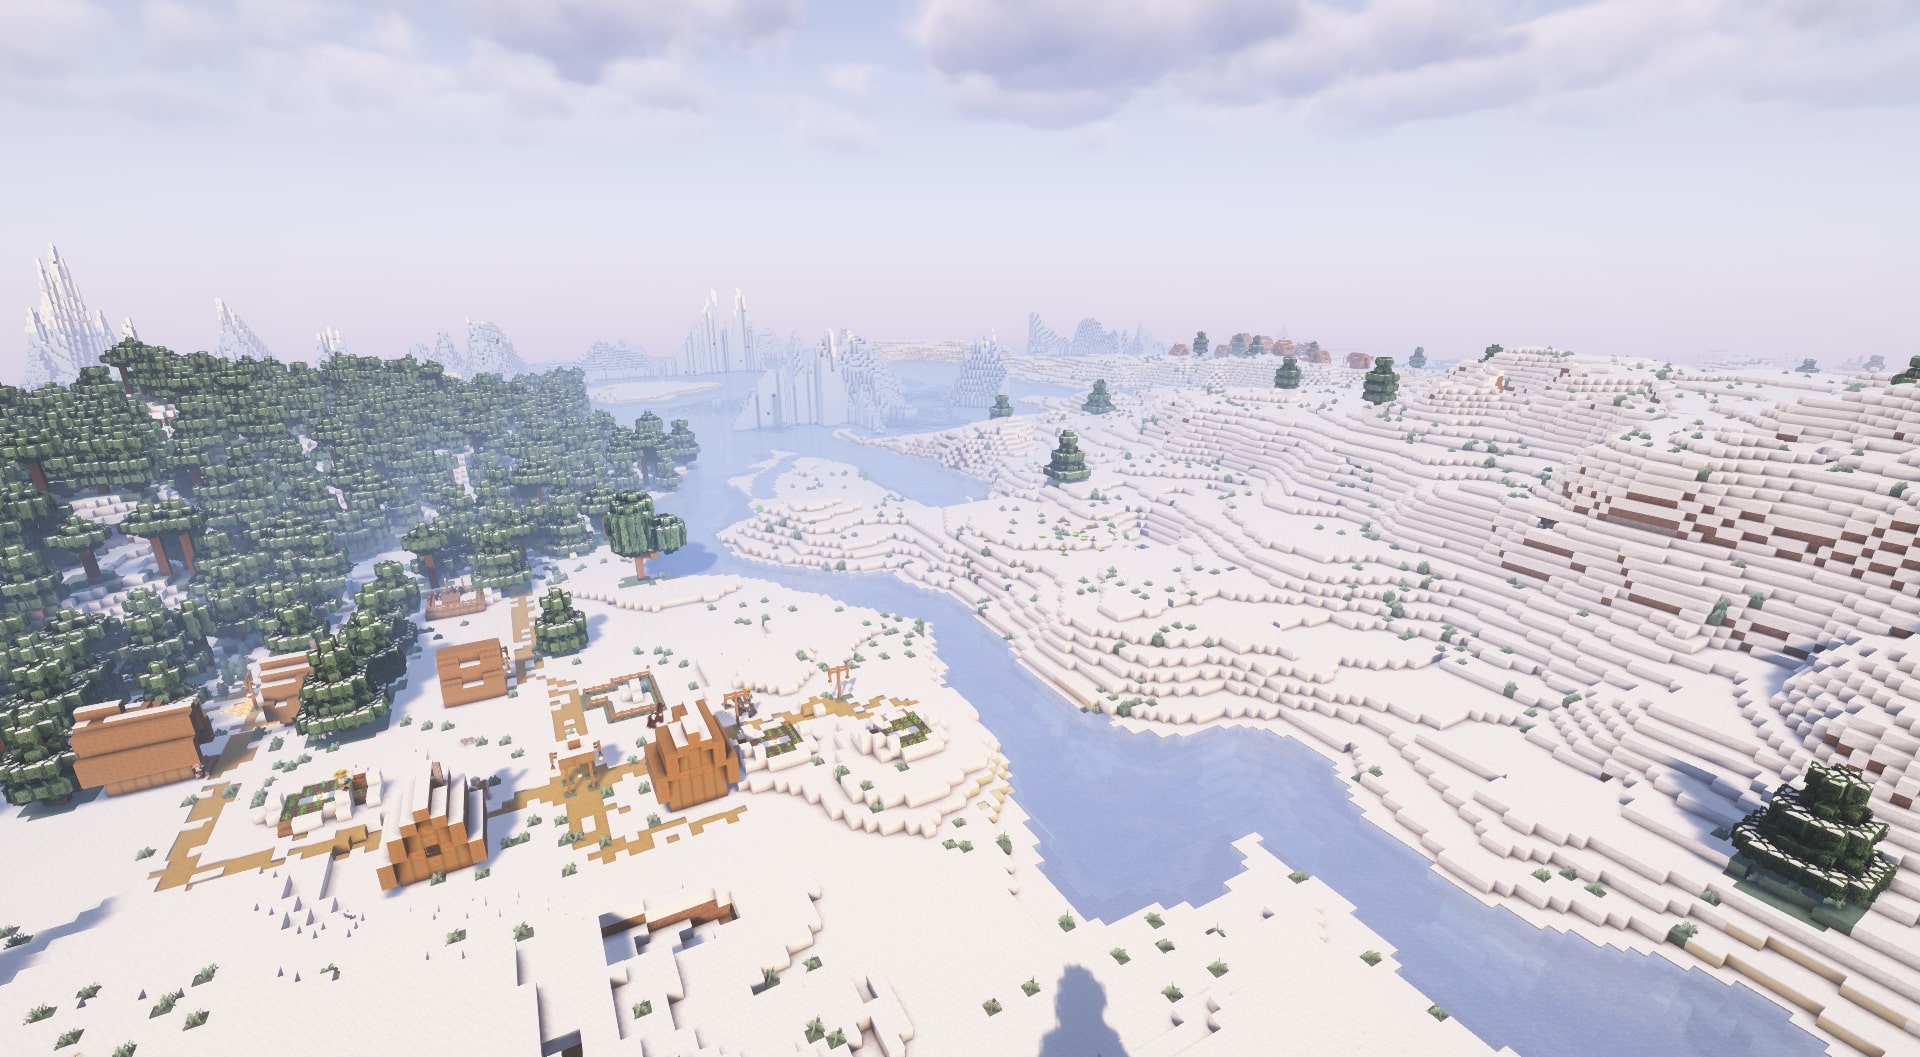 Image which showcases the Frozen Community seed